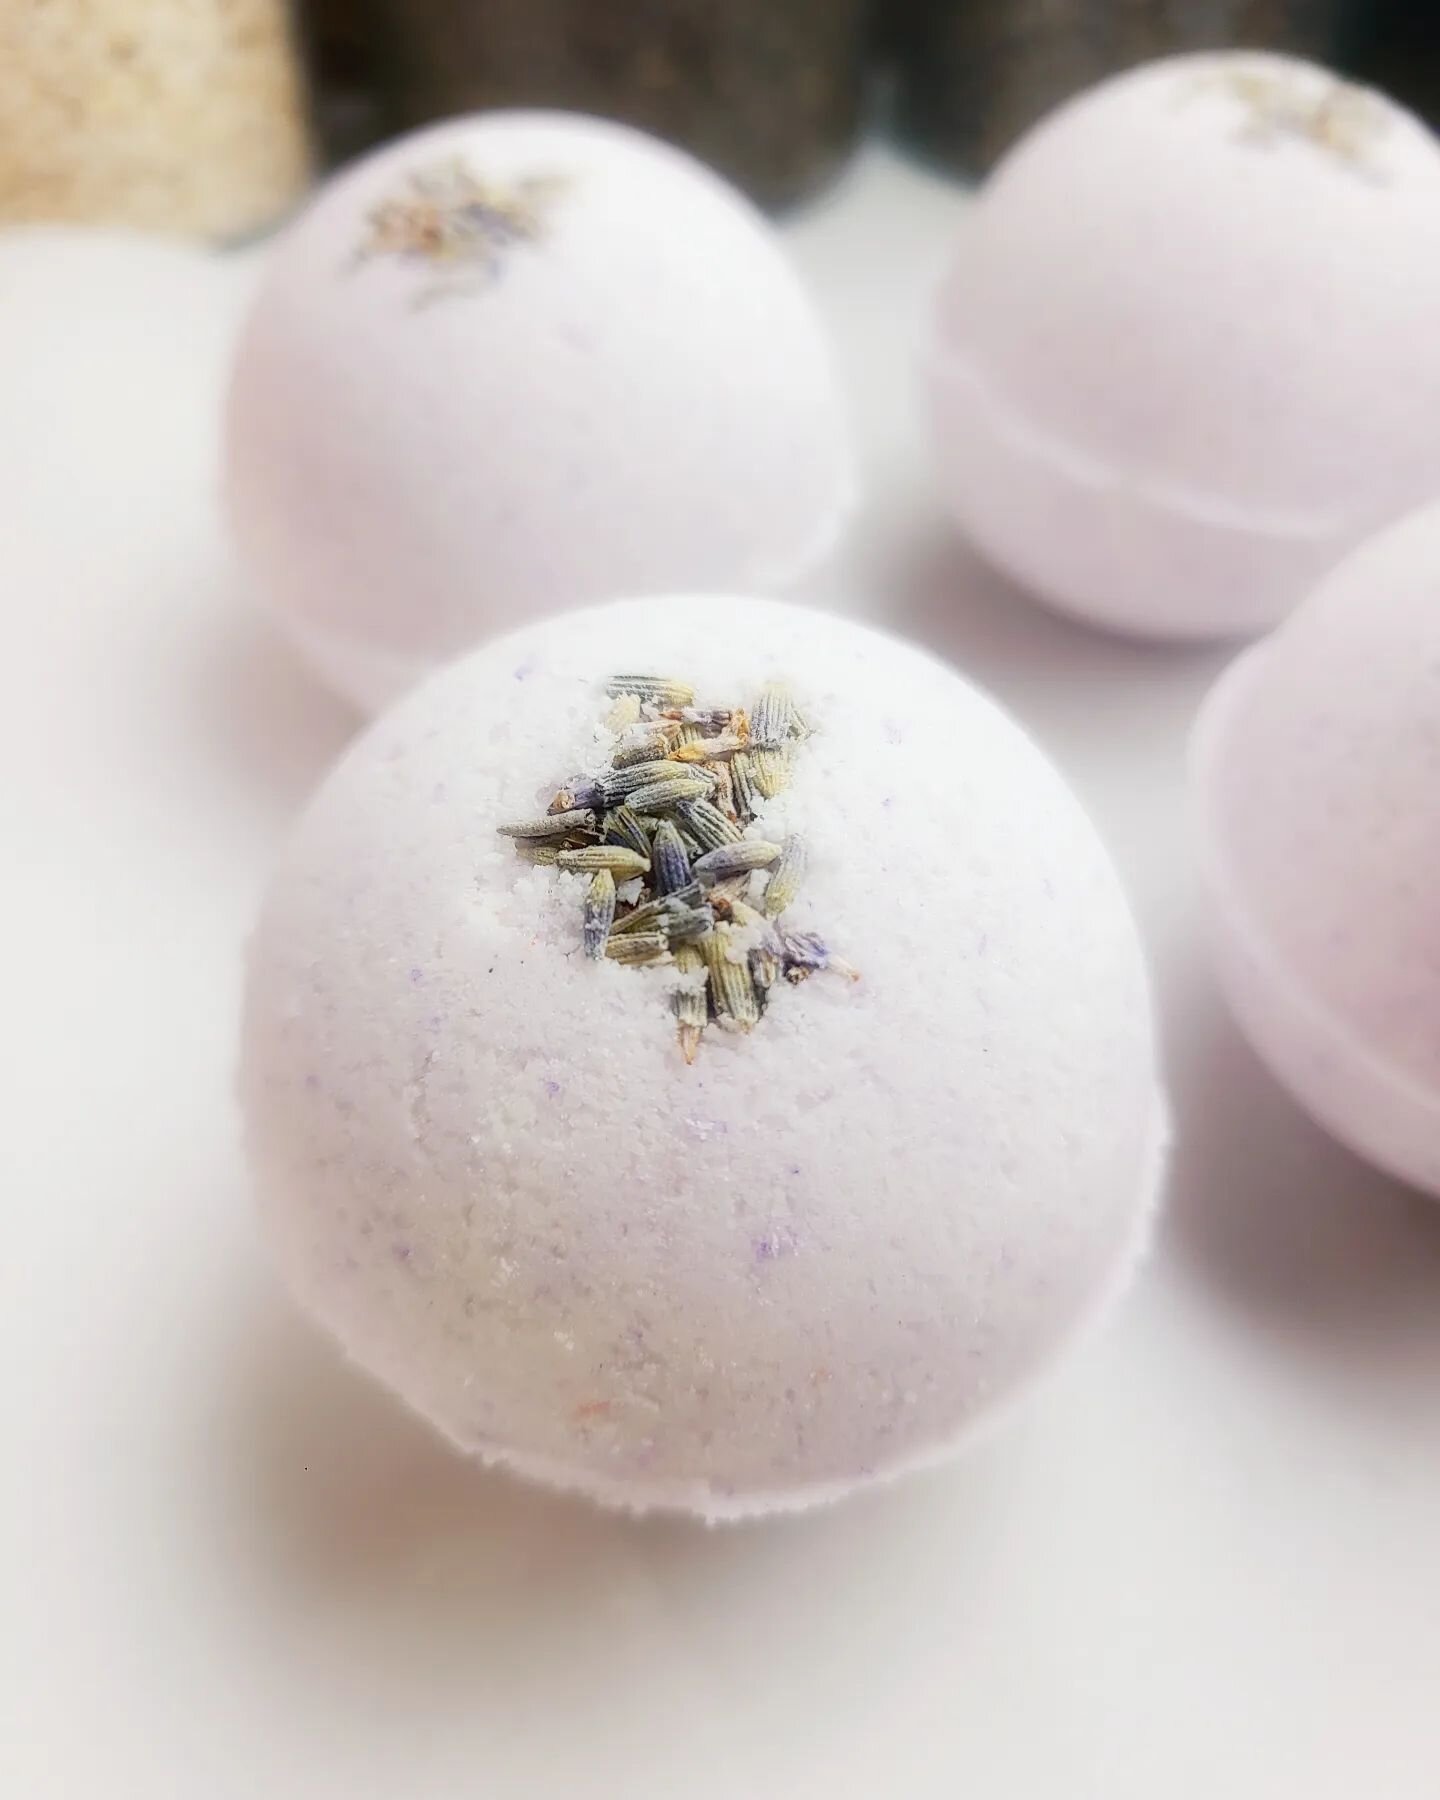 Playing with New Recipes: Bath Bombs 💜

#soapmaking #soapmaker